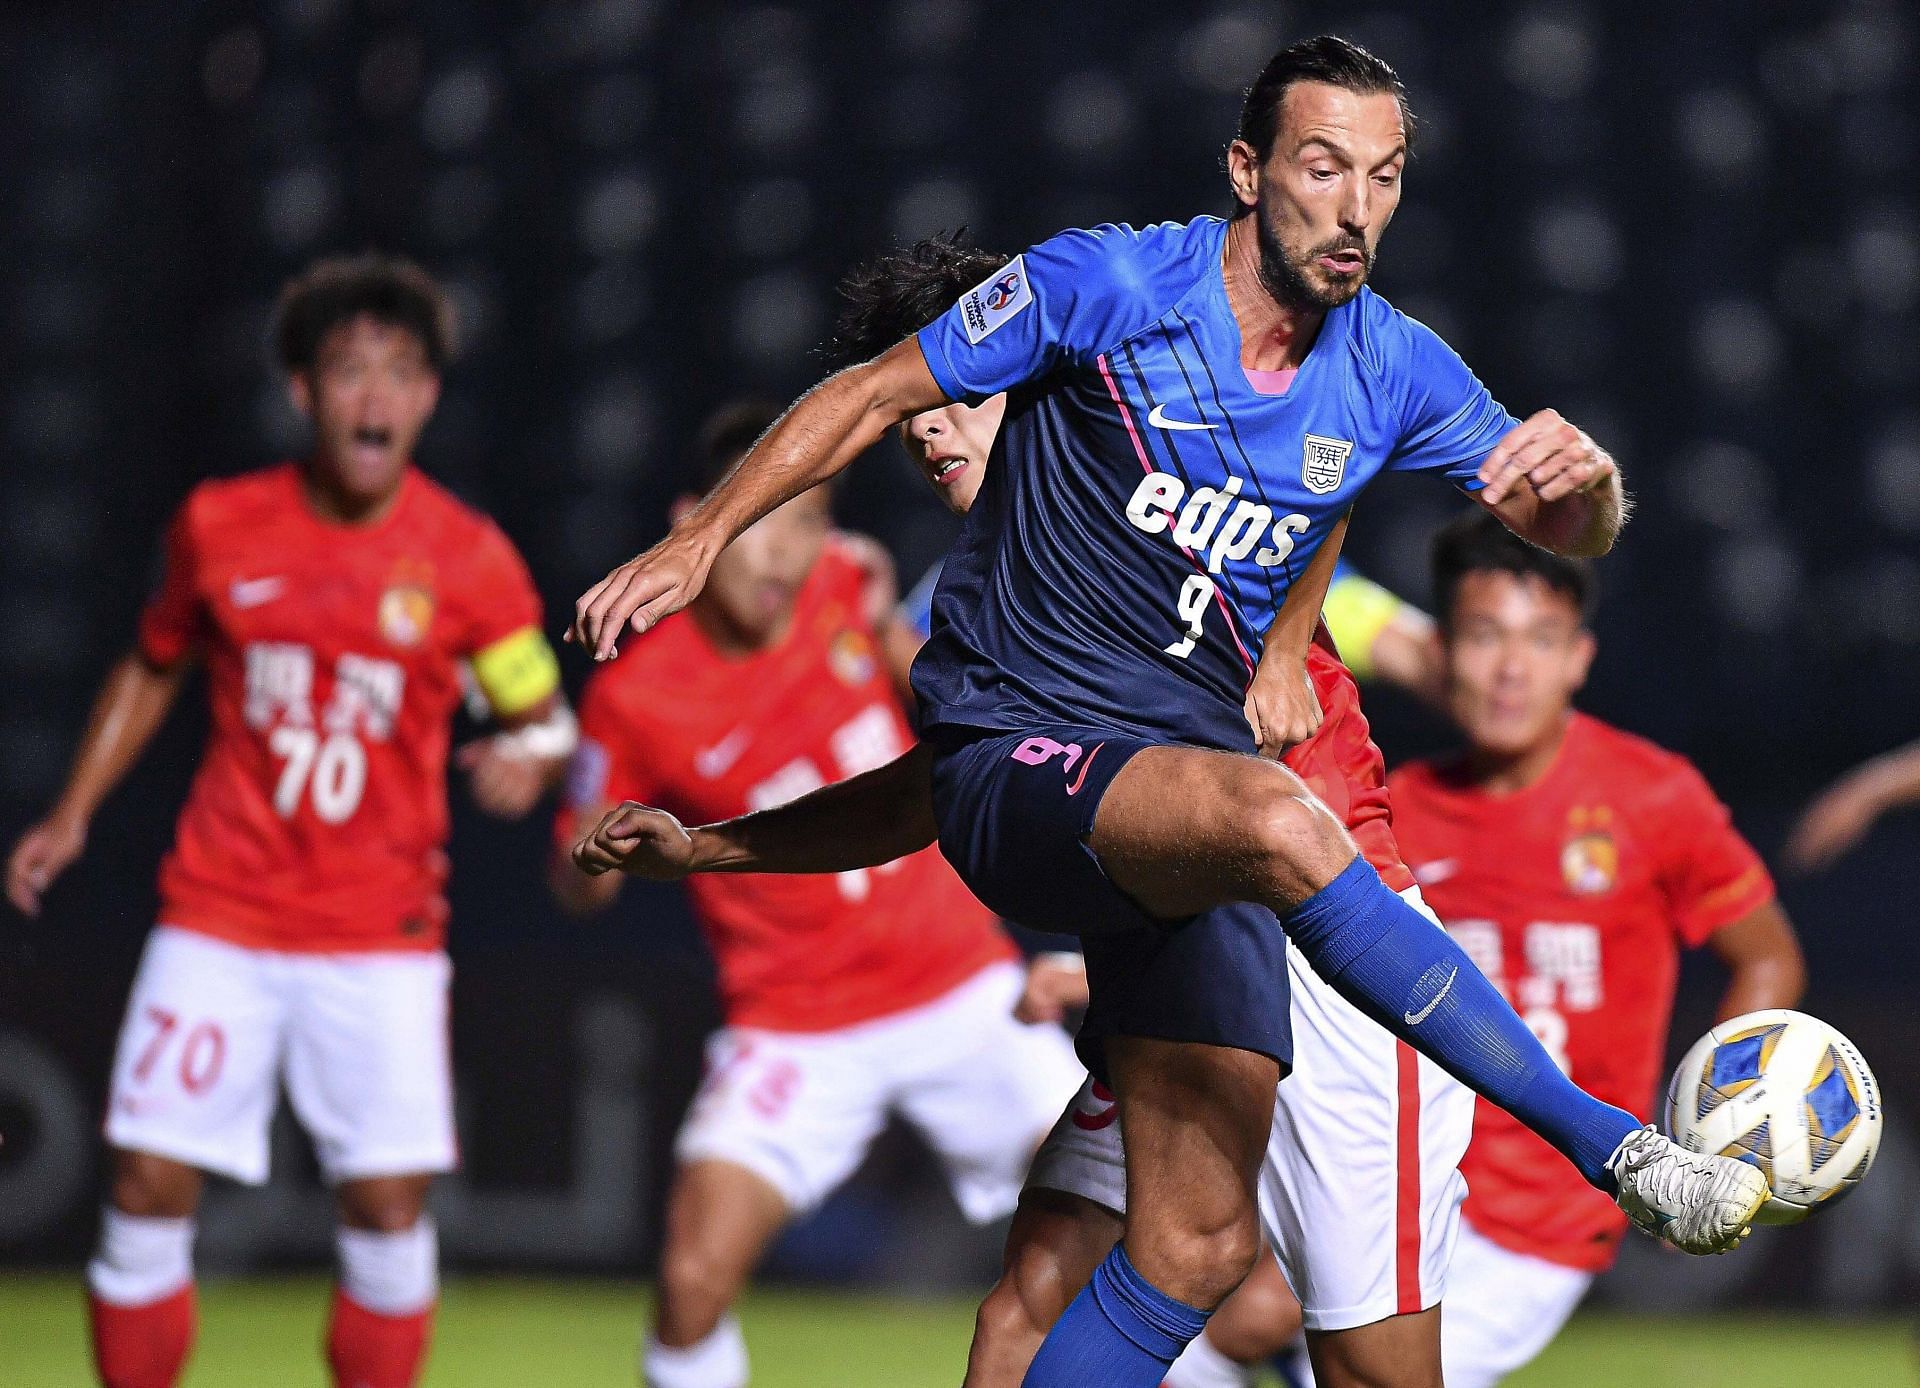 Kitchee SC host Chiangrai United in their upcoming AFC Champions League fixture on Saturday